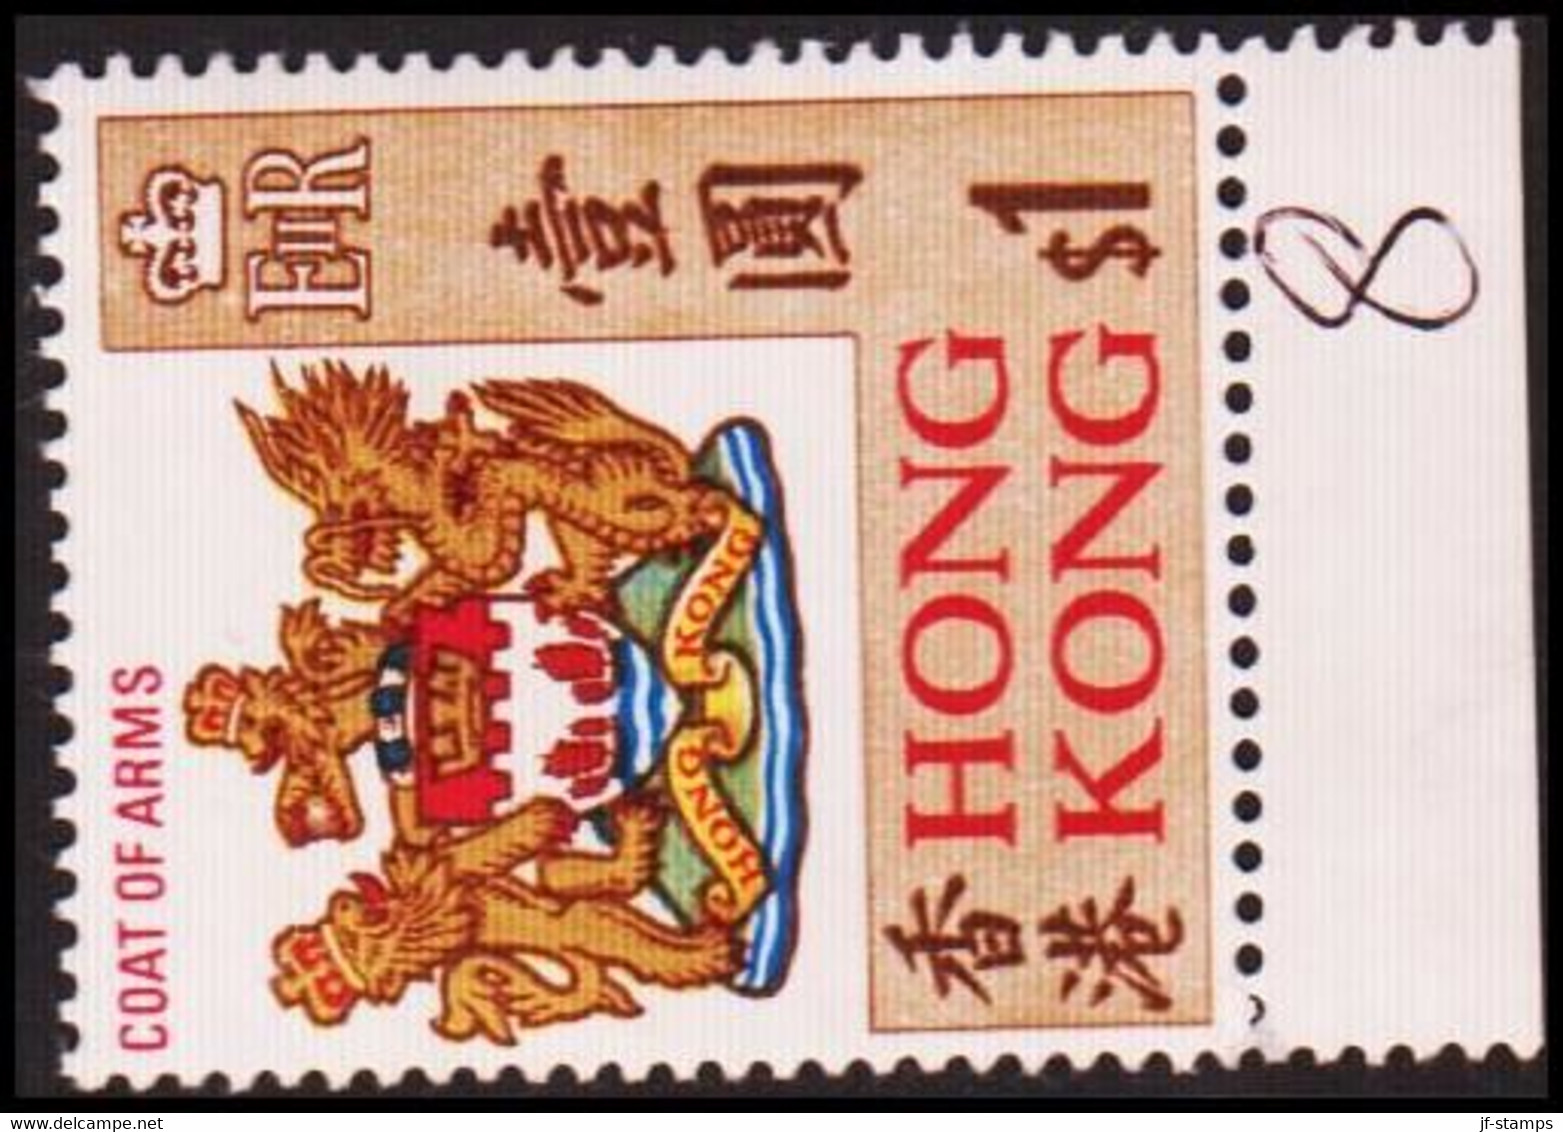 1968. HONG KONG COAT OF ARMS $ 1. NEVER HINGED. (Michel 239) - JF418511 - Unused Stamps